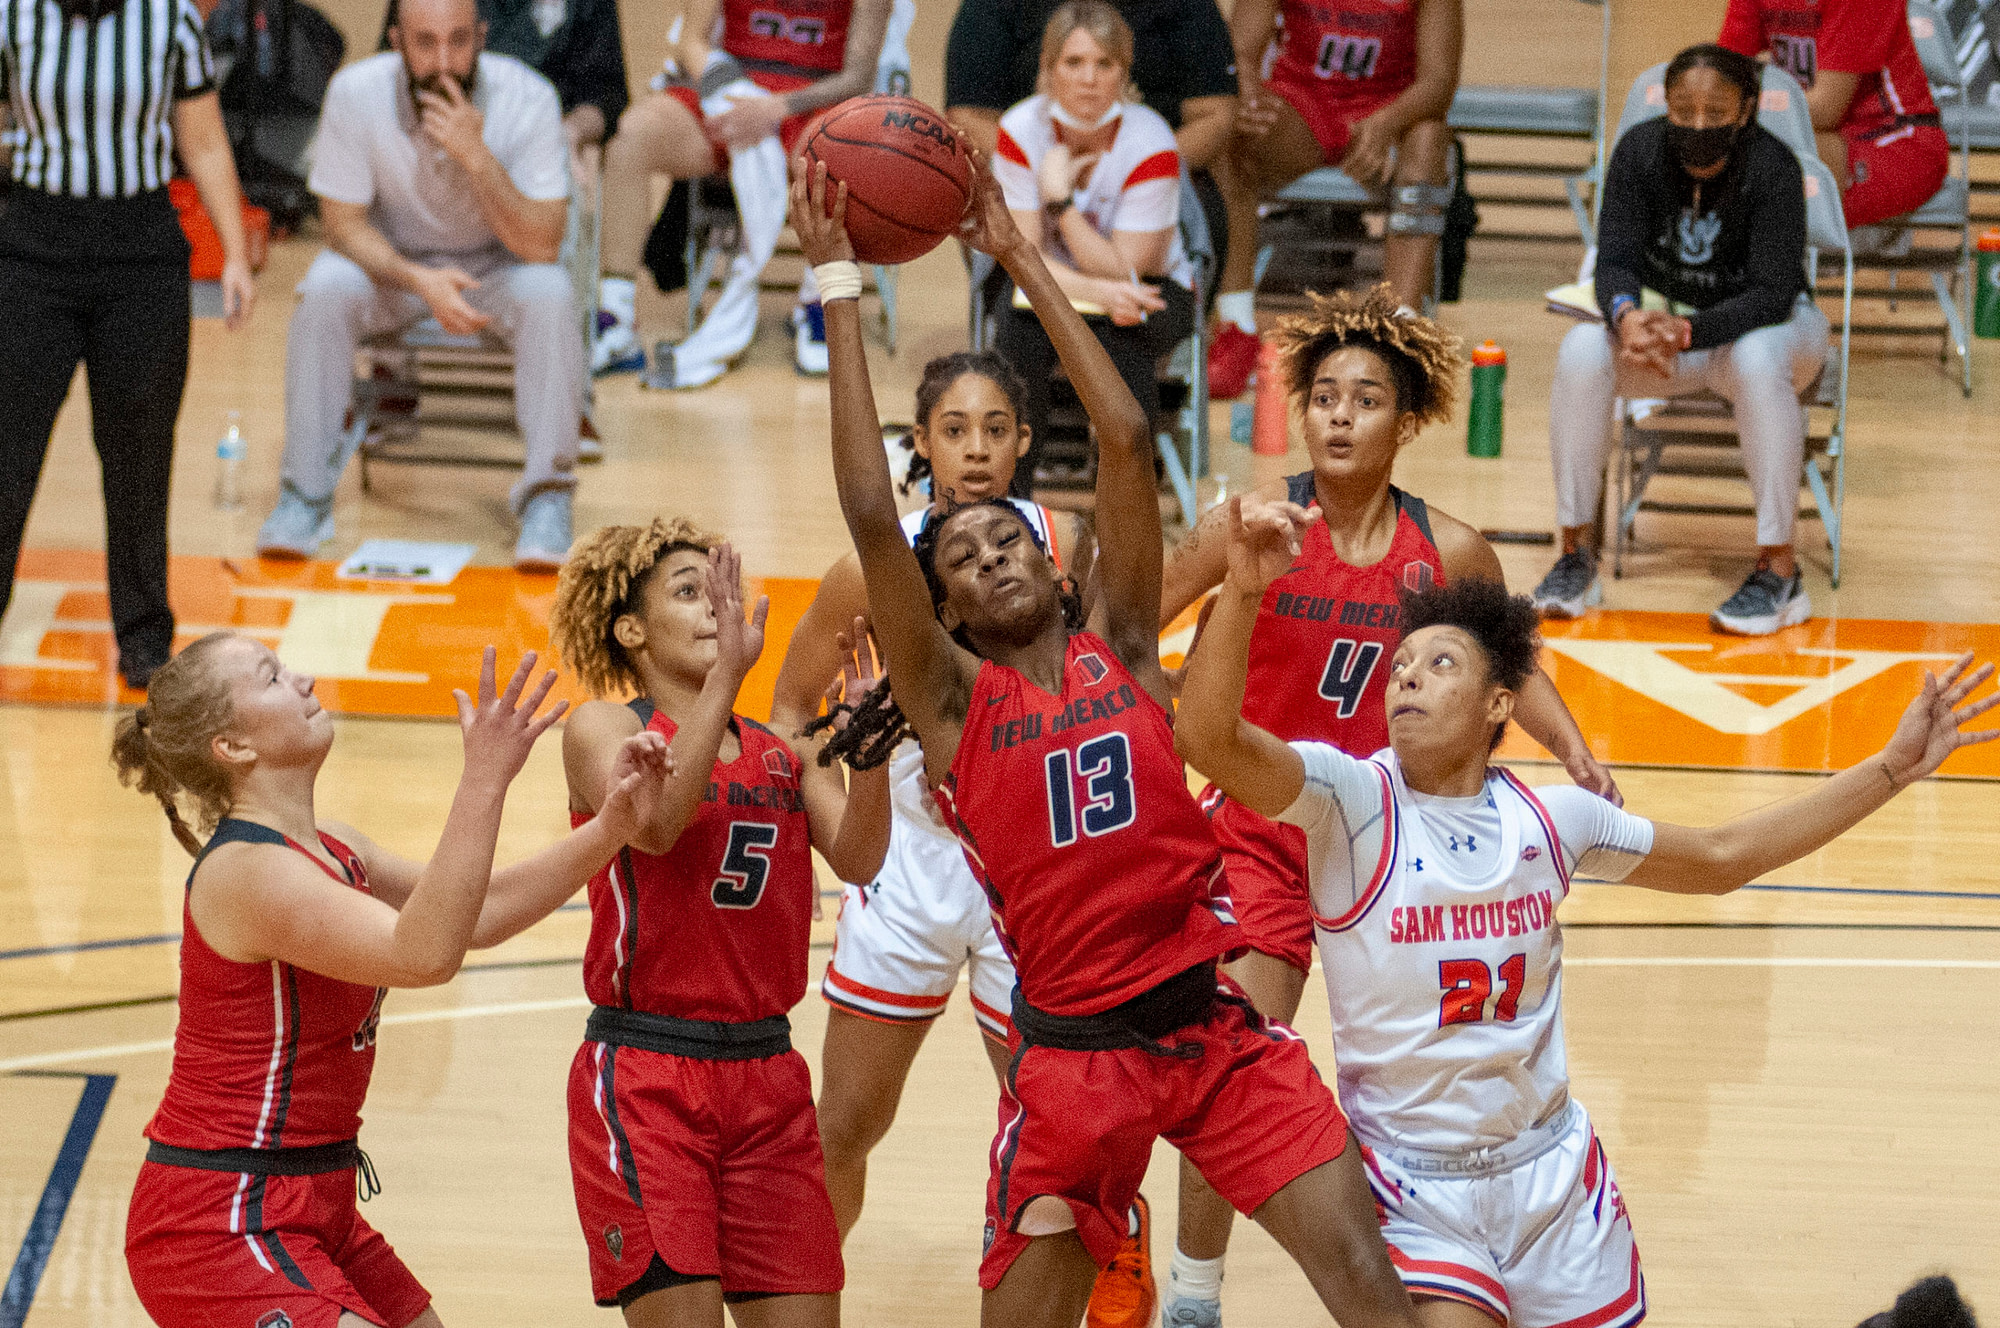 Lobos Overcome Poor 1st Quarter And Defeat Sam Houston State